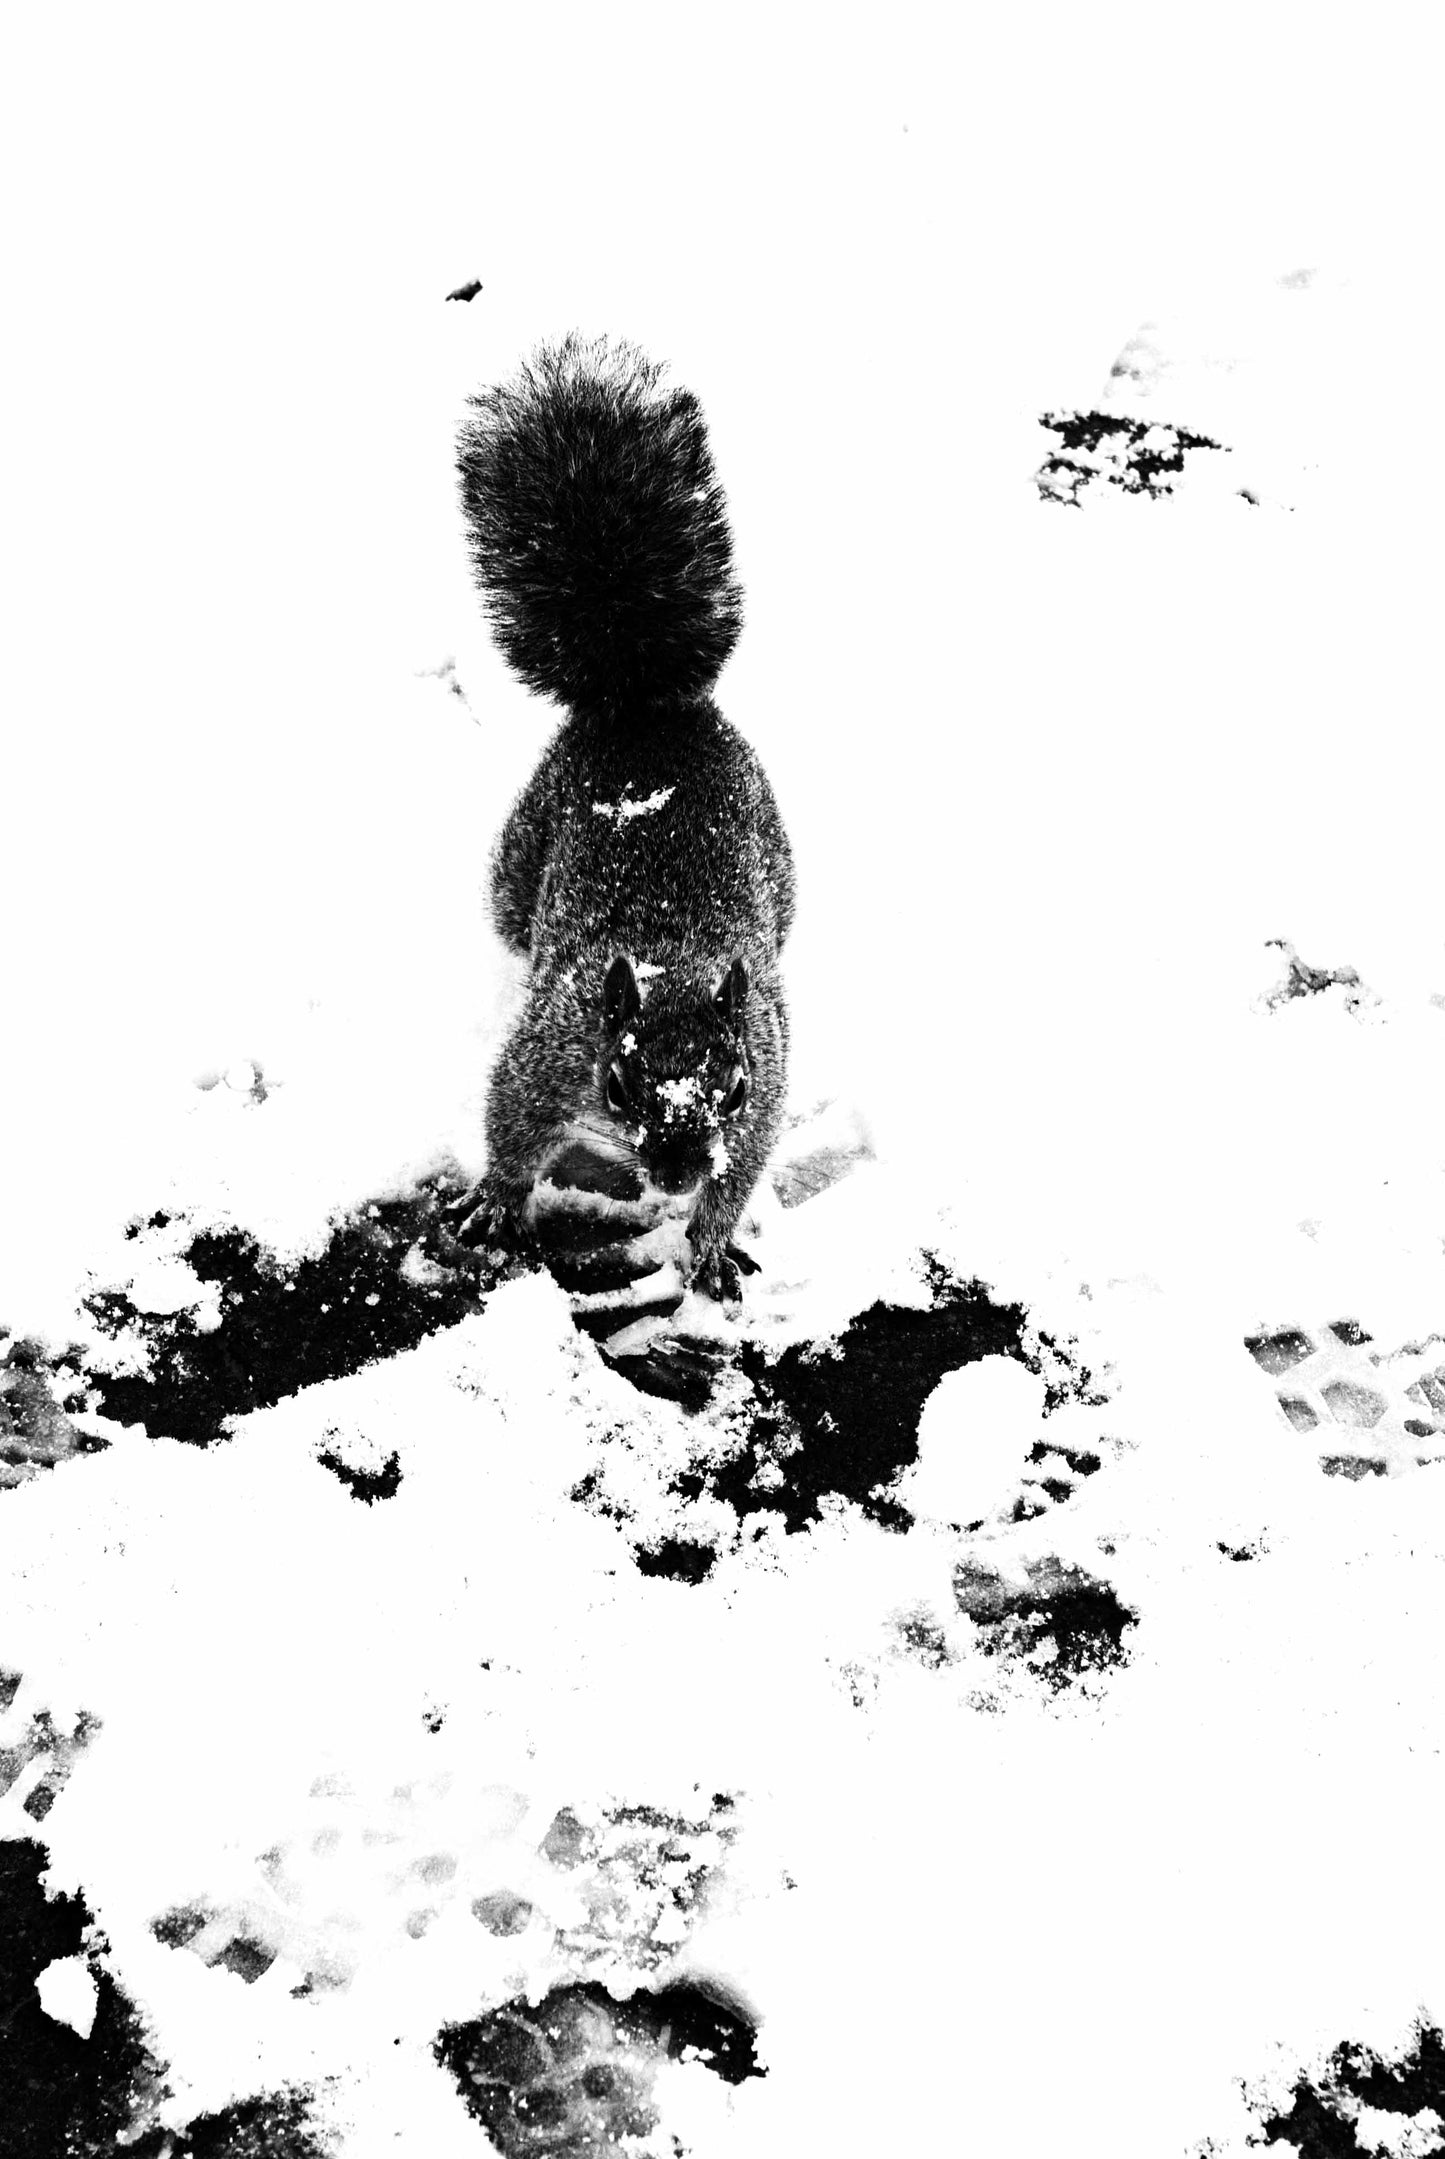 Alessandra Mattanza | DARE, New York. Braving winbter snow a daring squirrel ventures close hoping for a treat. Available as an art print or as a photographic print on acrylic glass.